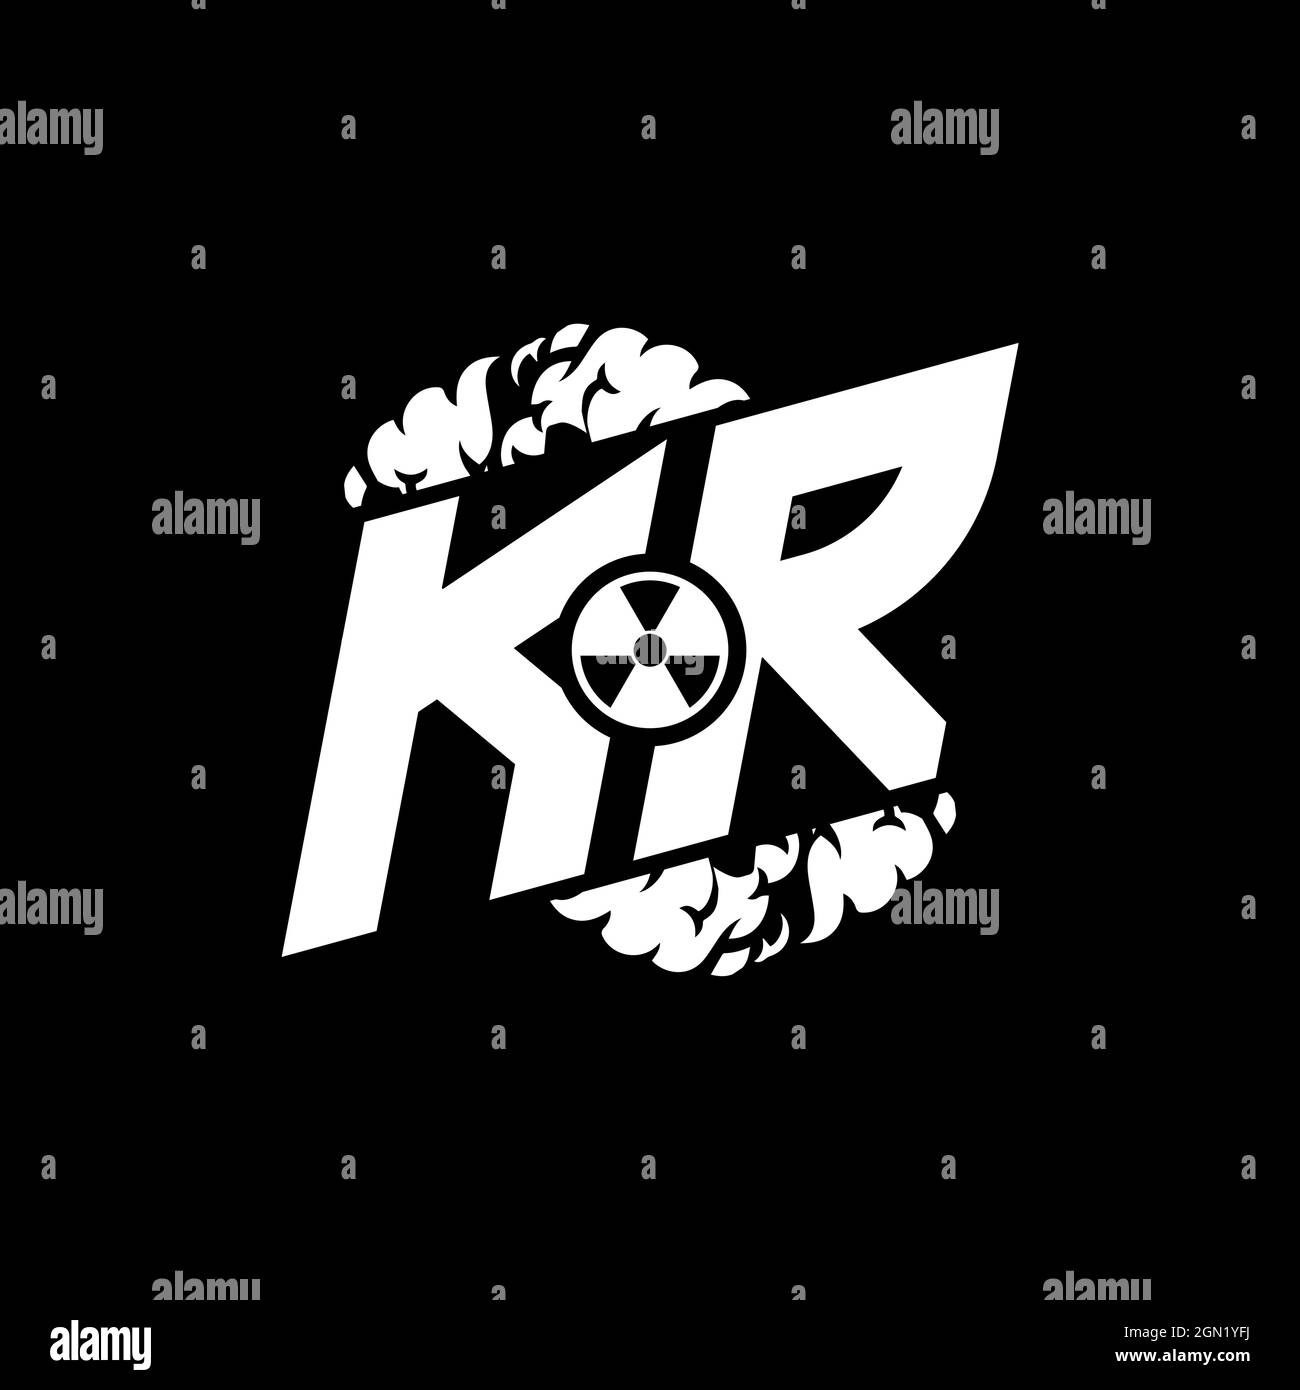 KR Initial ESport Monogram with Shape and Smoke Style template vector Stock Vector